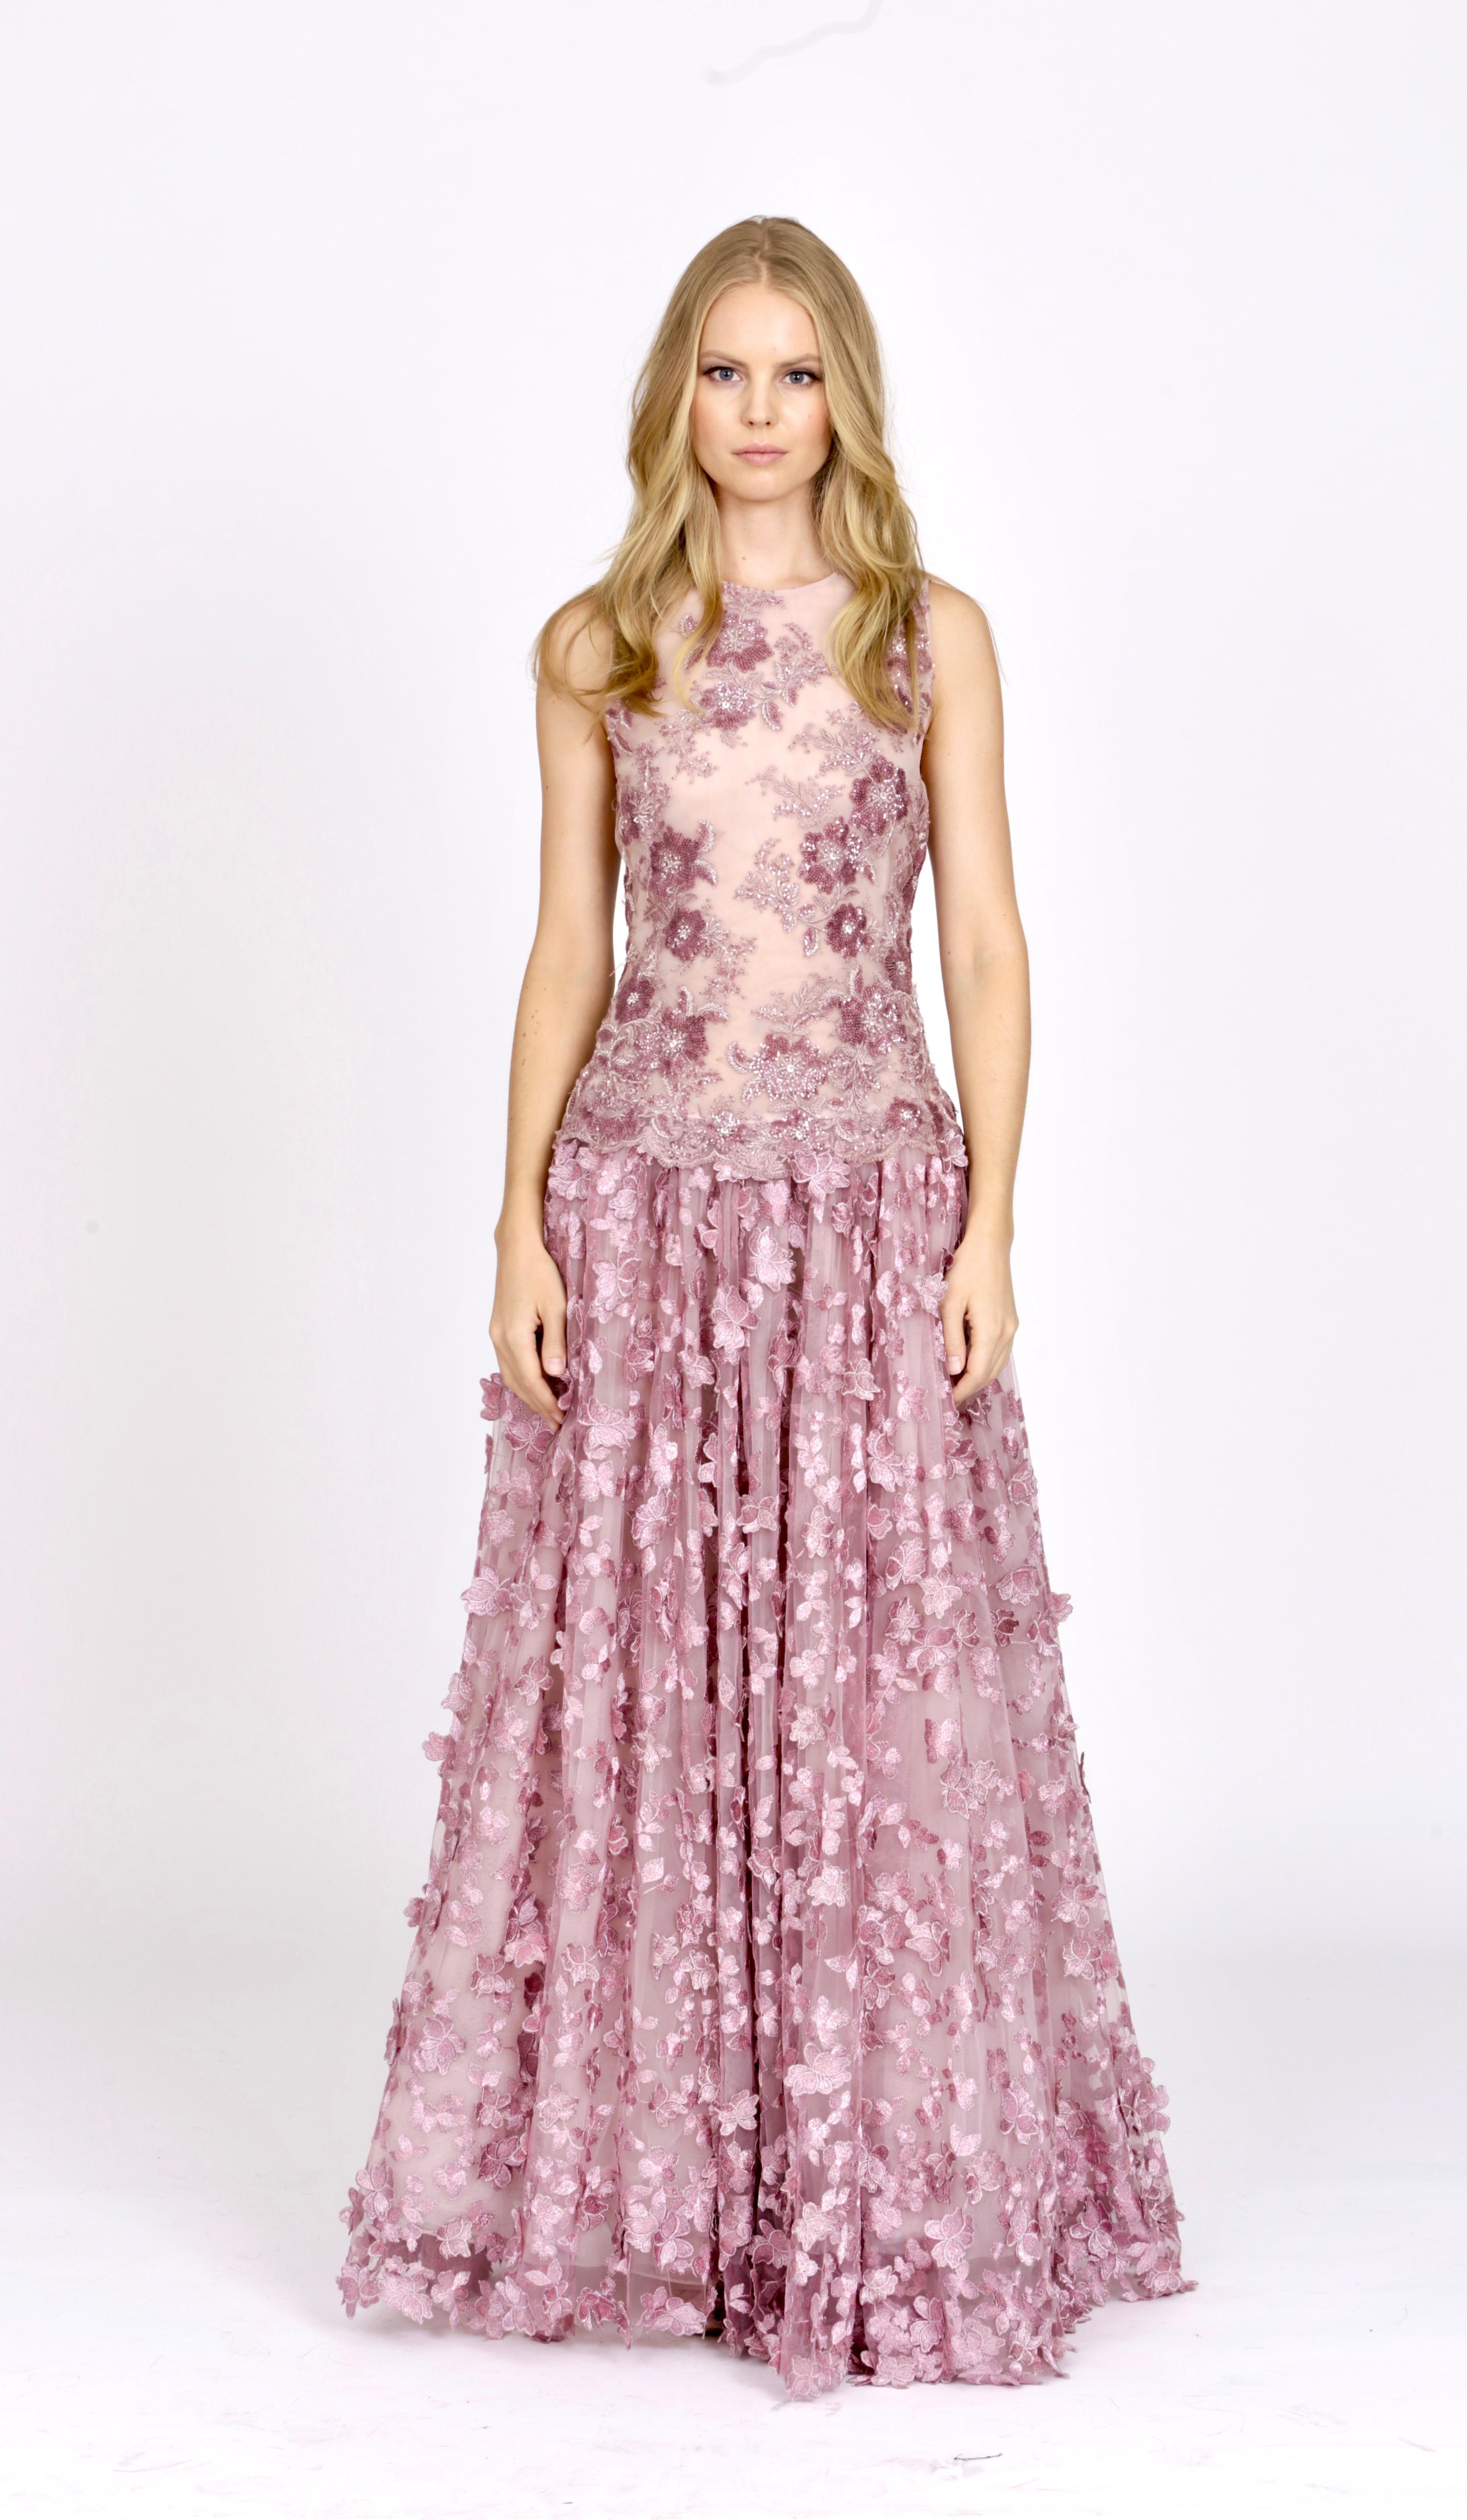 The Grace Pelush pink tulle dress gown with three dimensional flowers and embroidery is a one of a kind exclusive Couture piece. Adorned with cascading butterfly floral petals, lace sparkling sequins, pearls, metallic lurex threads and constructed